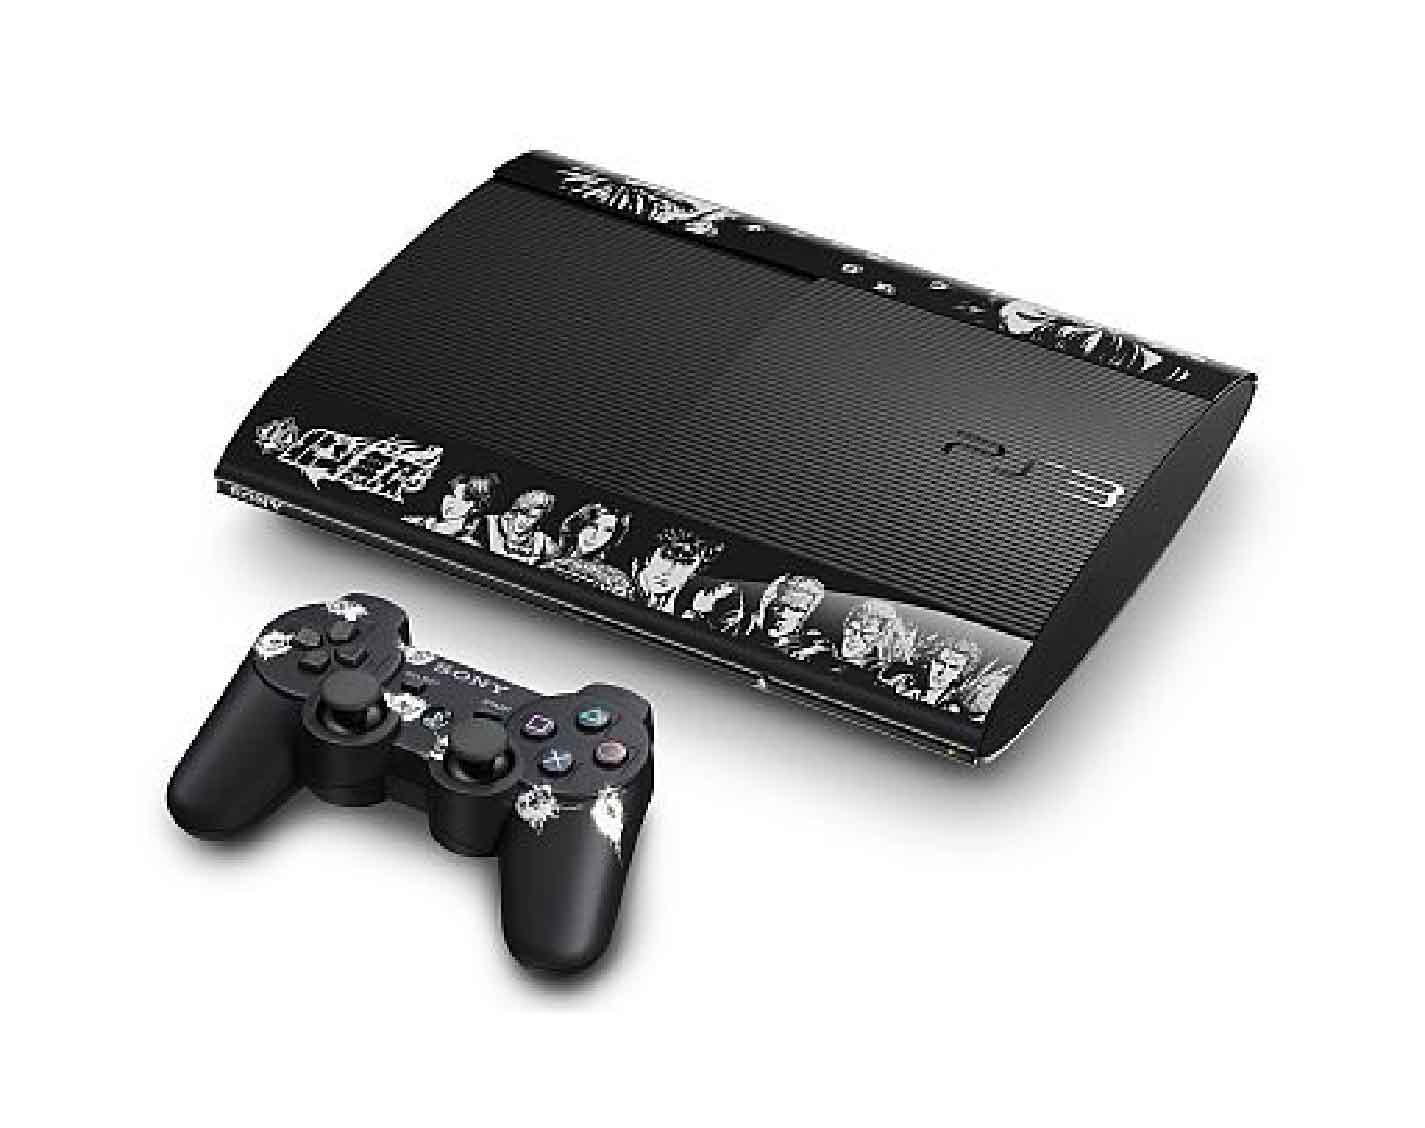 The Last of Us PS3 Sony Playstation 3 From Japan